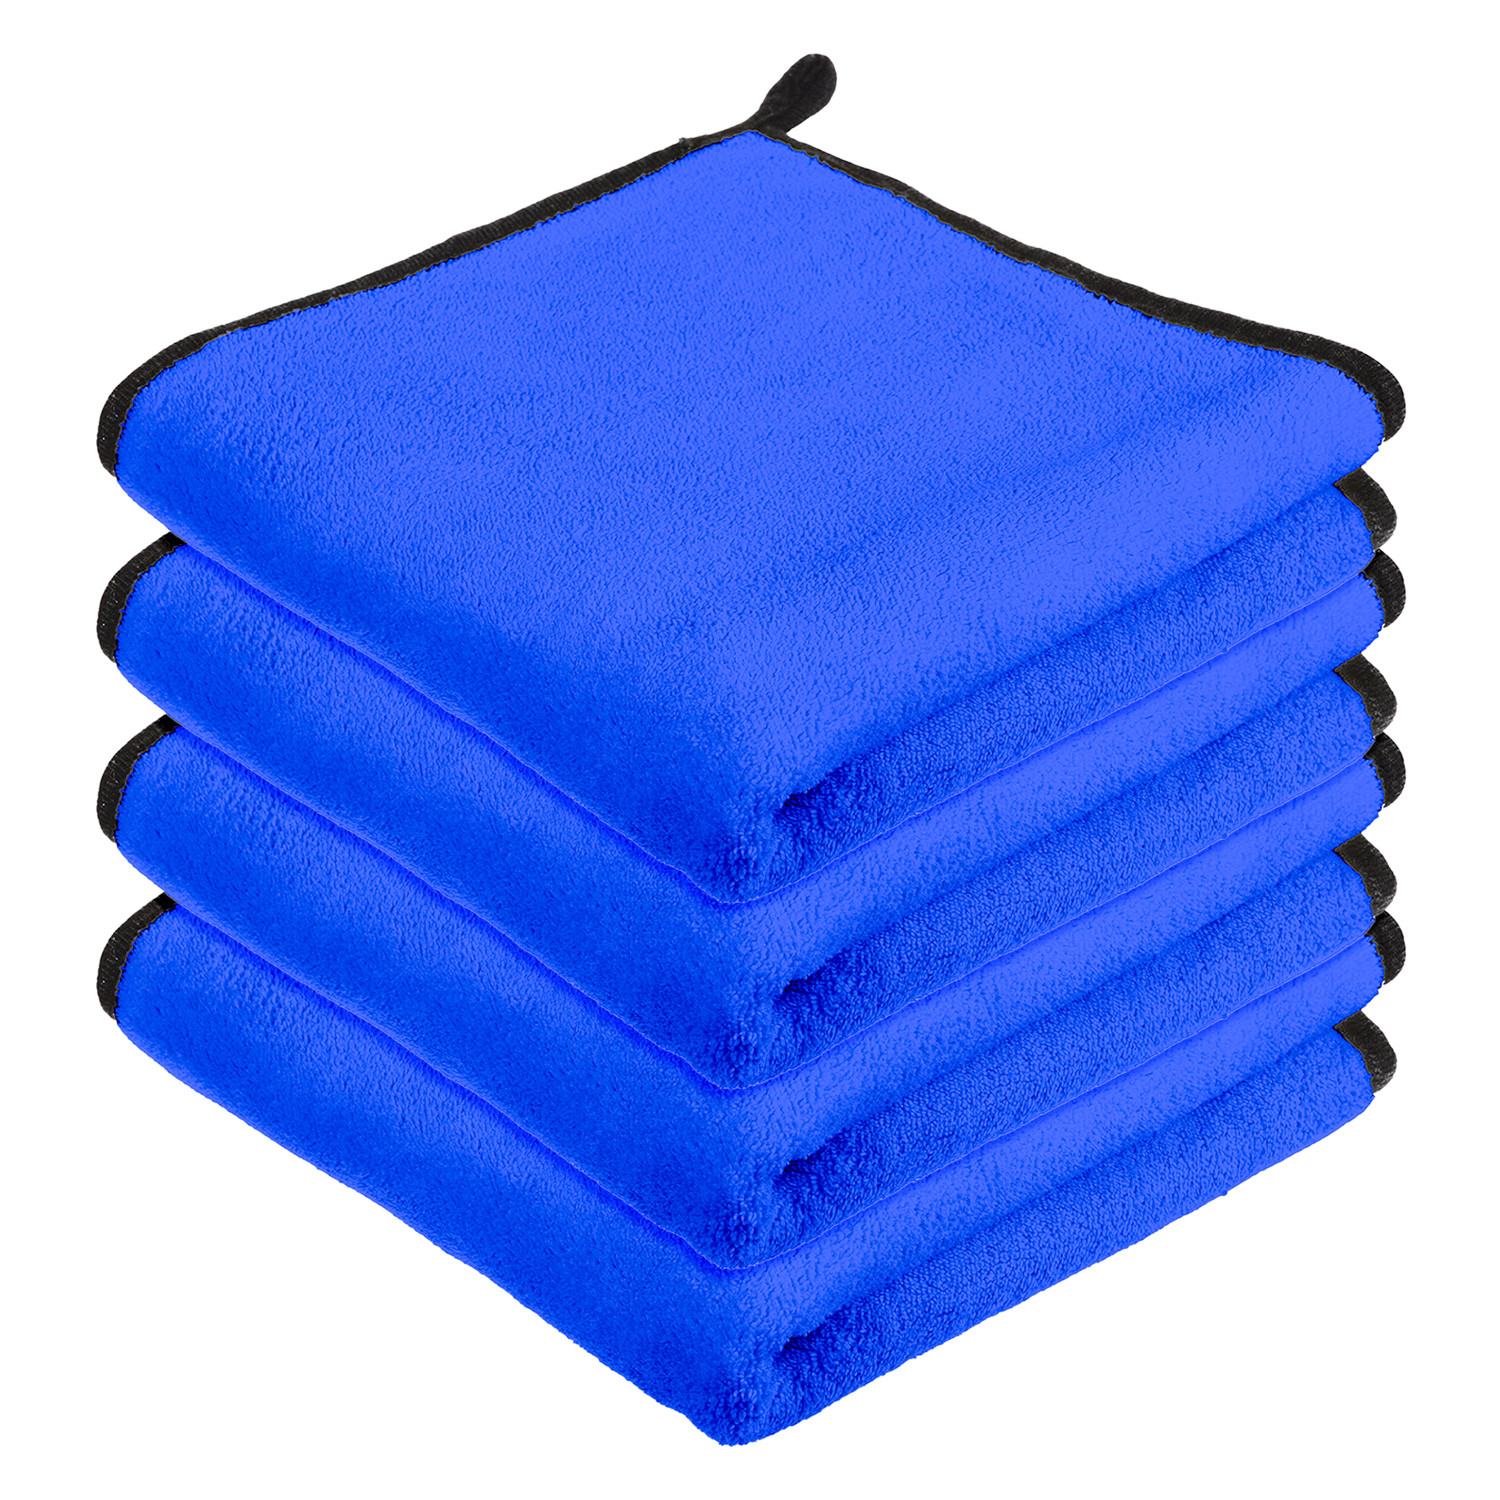 Kuber Industries Cleaning Towel|Microfiber Reusable Cloths|Highly Absorbent Washable Towel for Kitchen With Hanging Loop|Car|Window|40x40 Cm|Blue